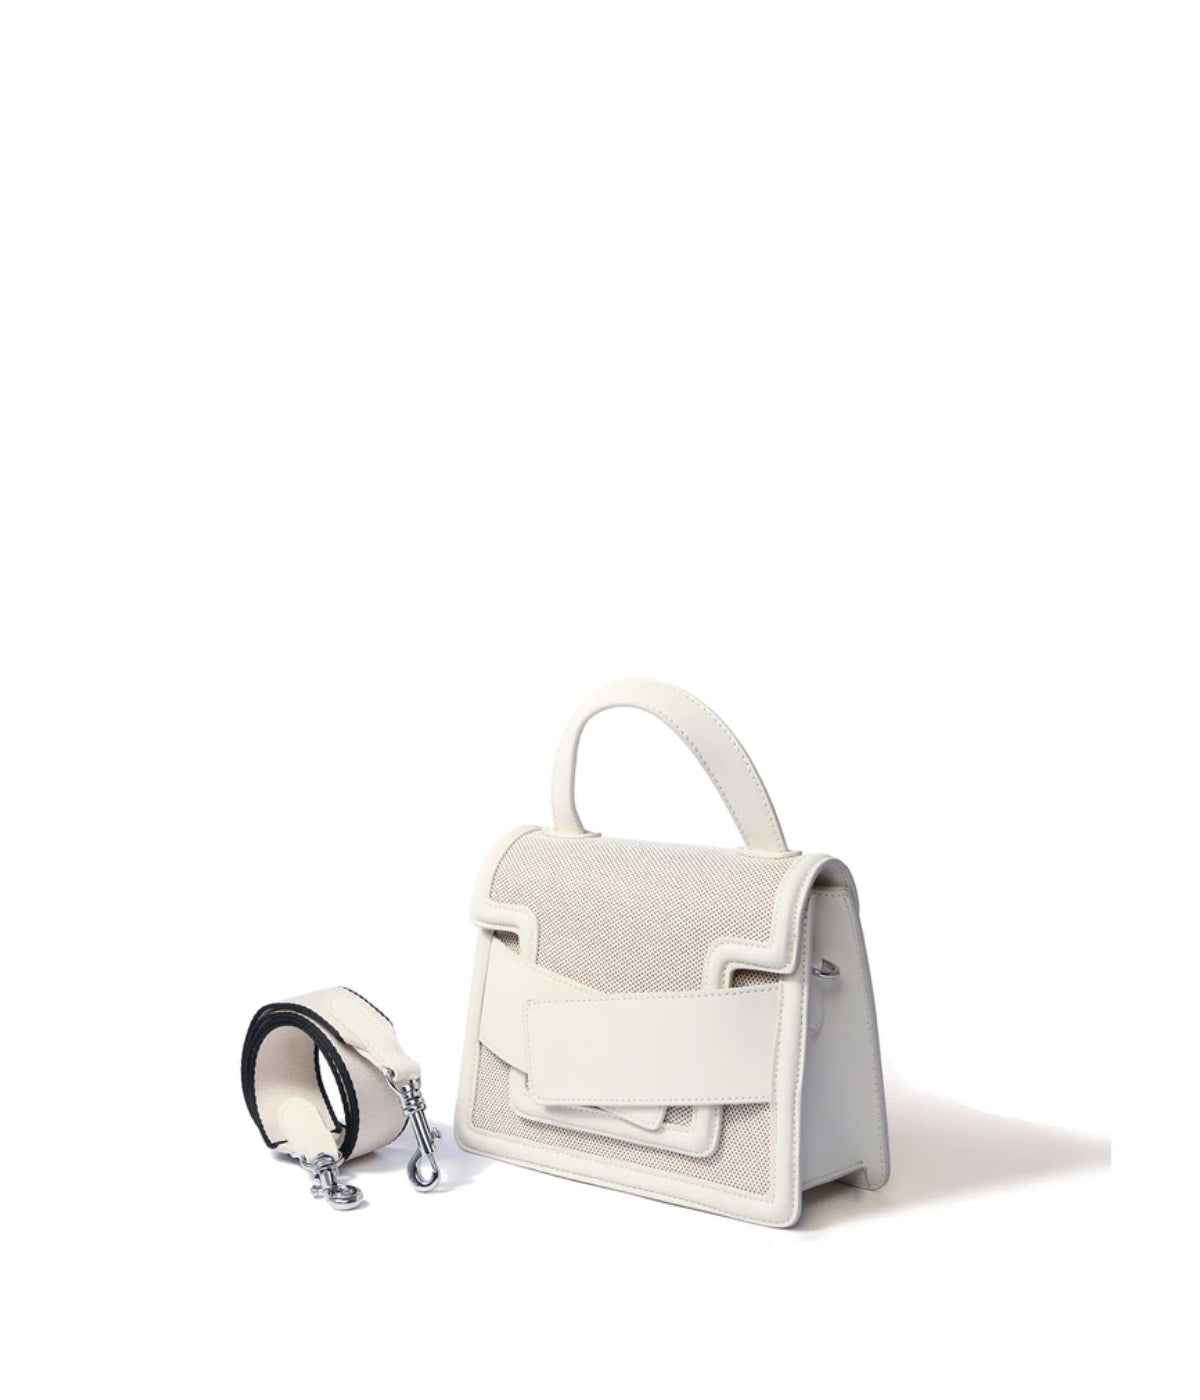 Evelyn Bag in Canvas and Genuine Leather White